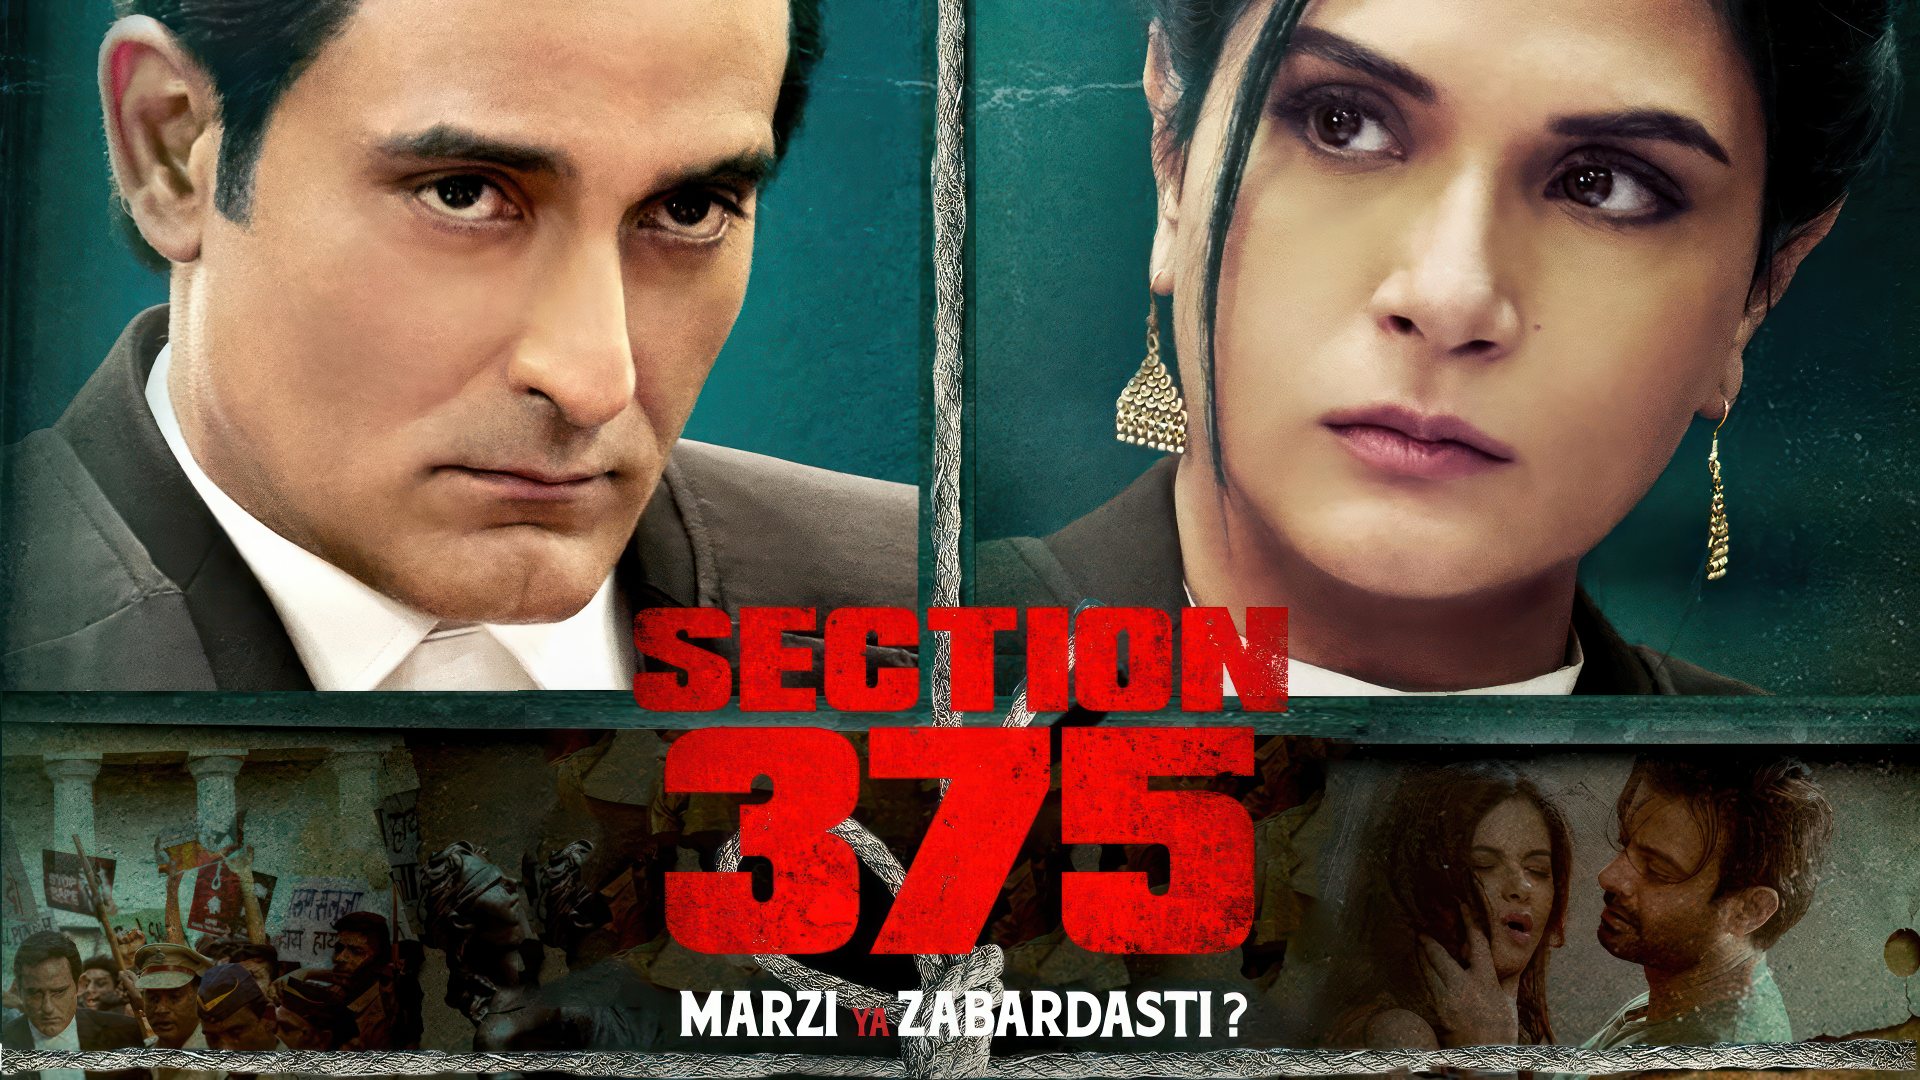 Section 375 (2019) Google Drive Download